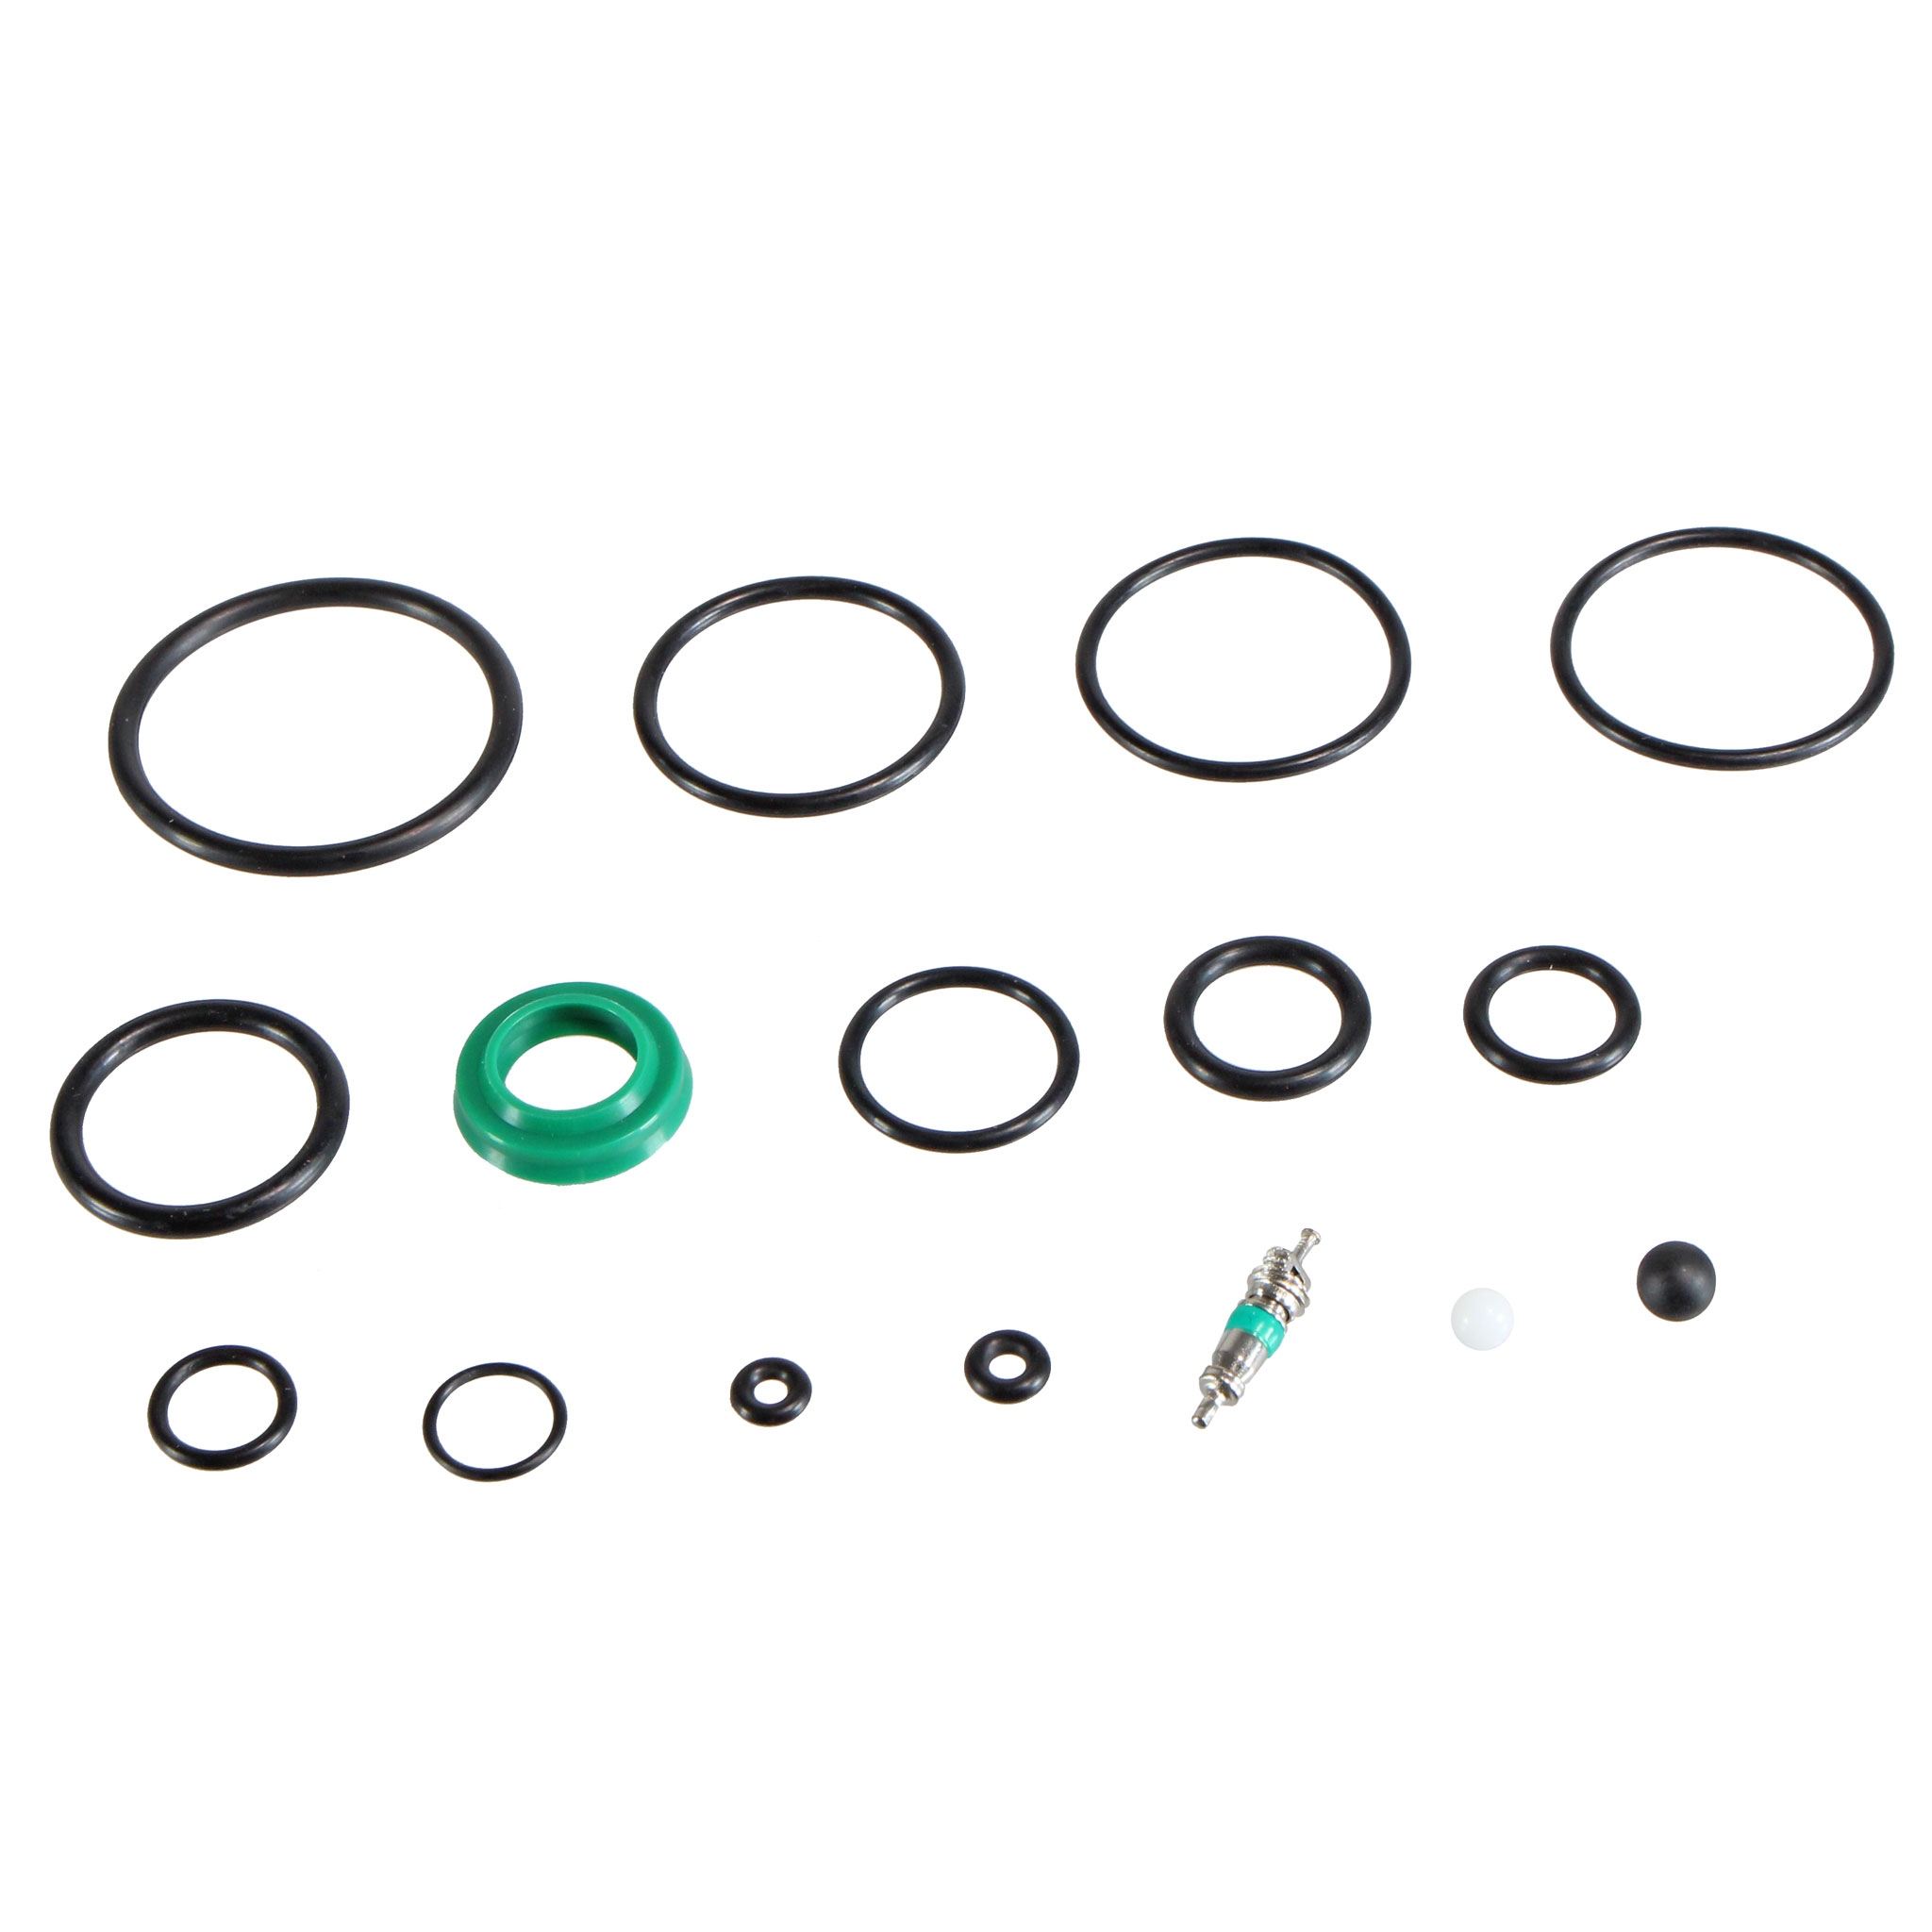 Anso Suspension X-Fusion Vector Coil R/RC/HLR, Damper Service Kit